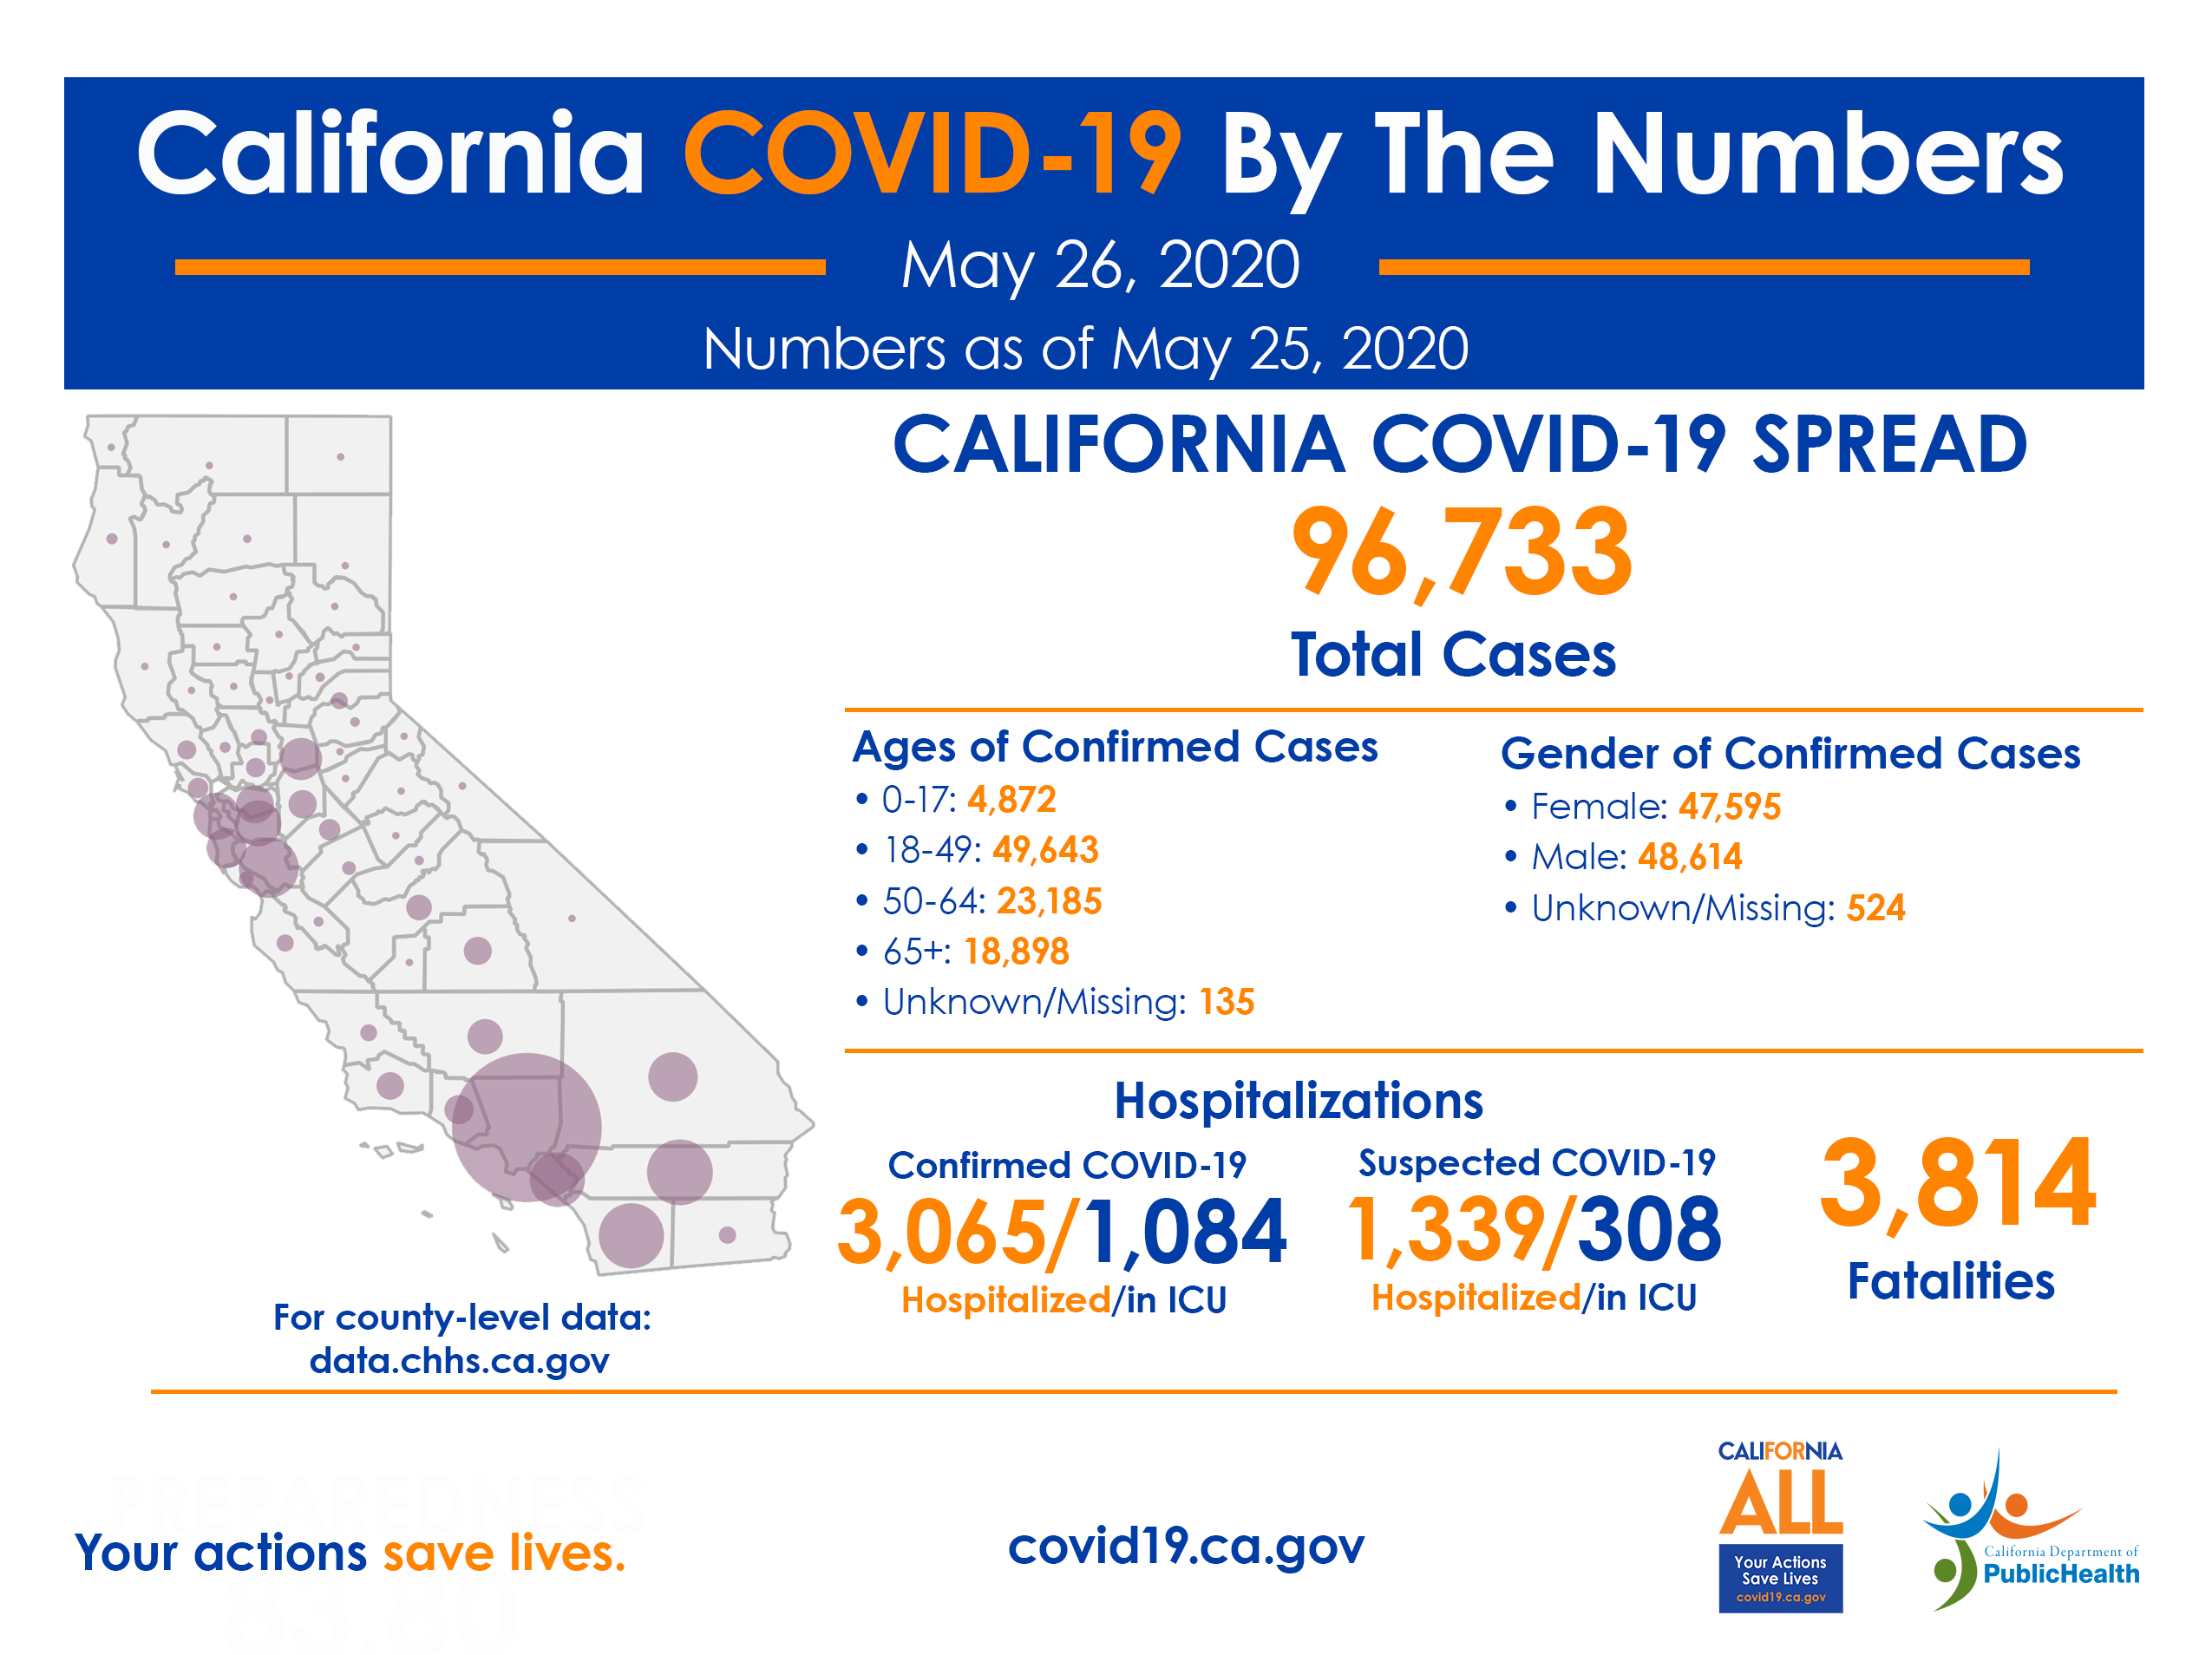 California COVID-19 by the Numbers as of May 25, 2020